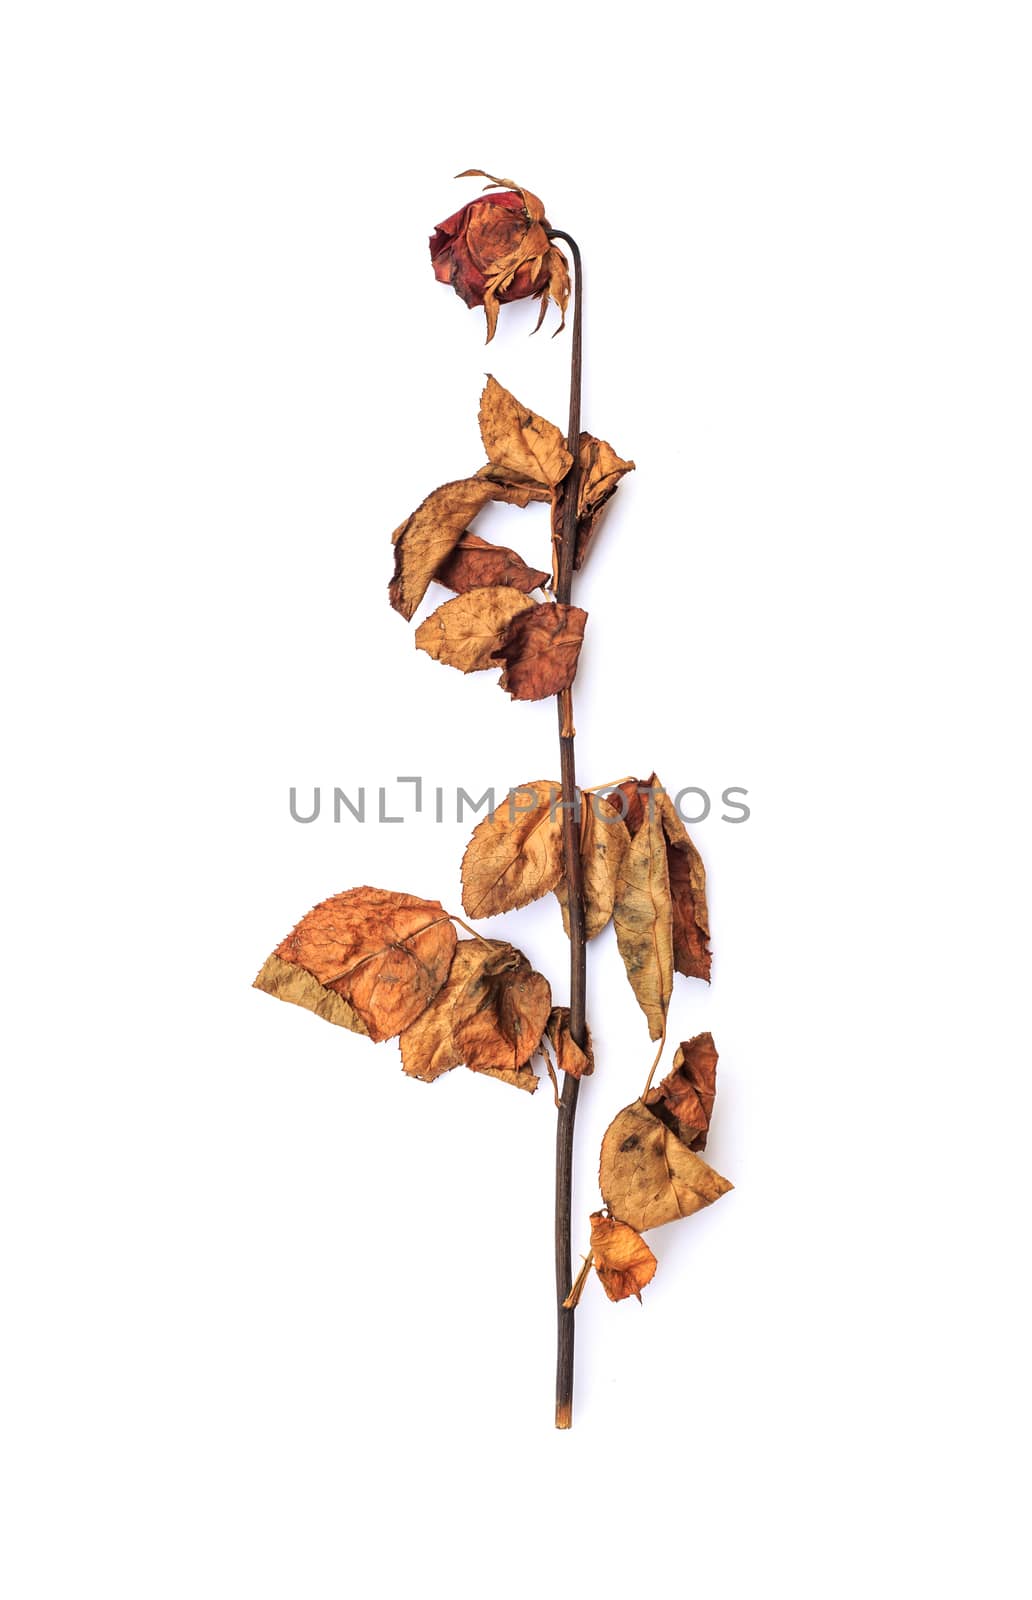 Dried rose isolated on white background